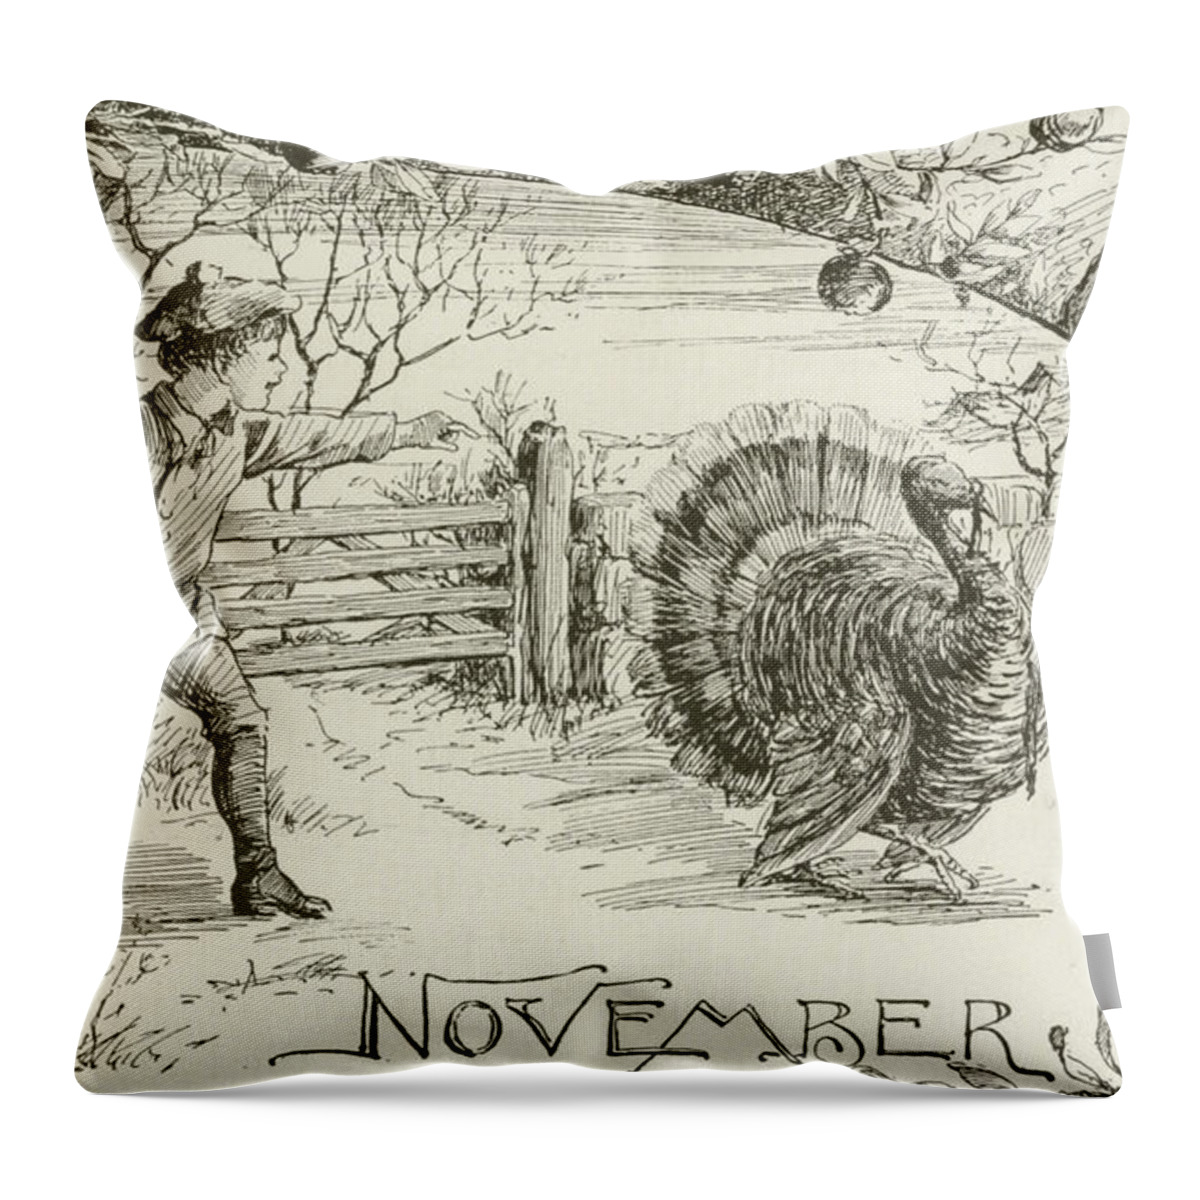 Novmber Throw Pillow featuring the drawing November  Vintage Thanksgiving Card by American School